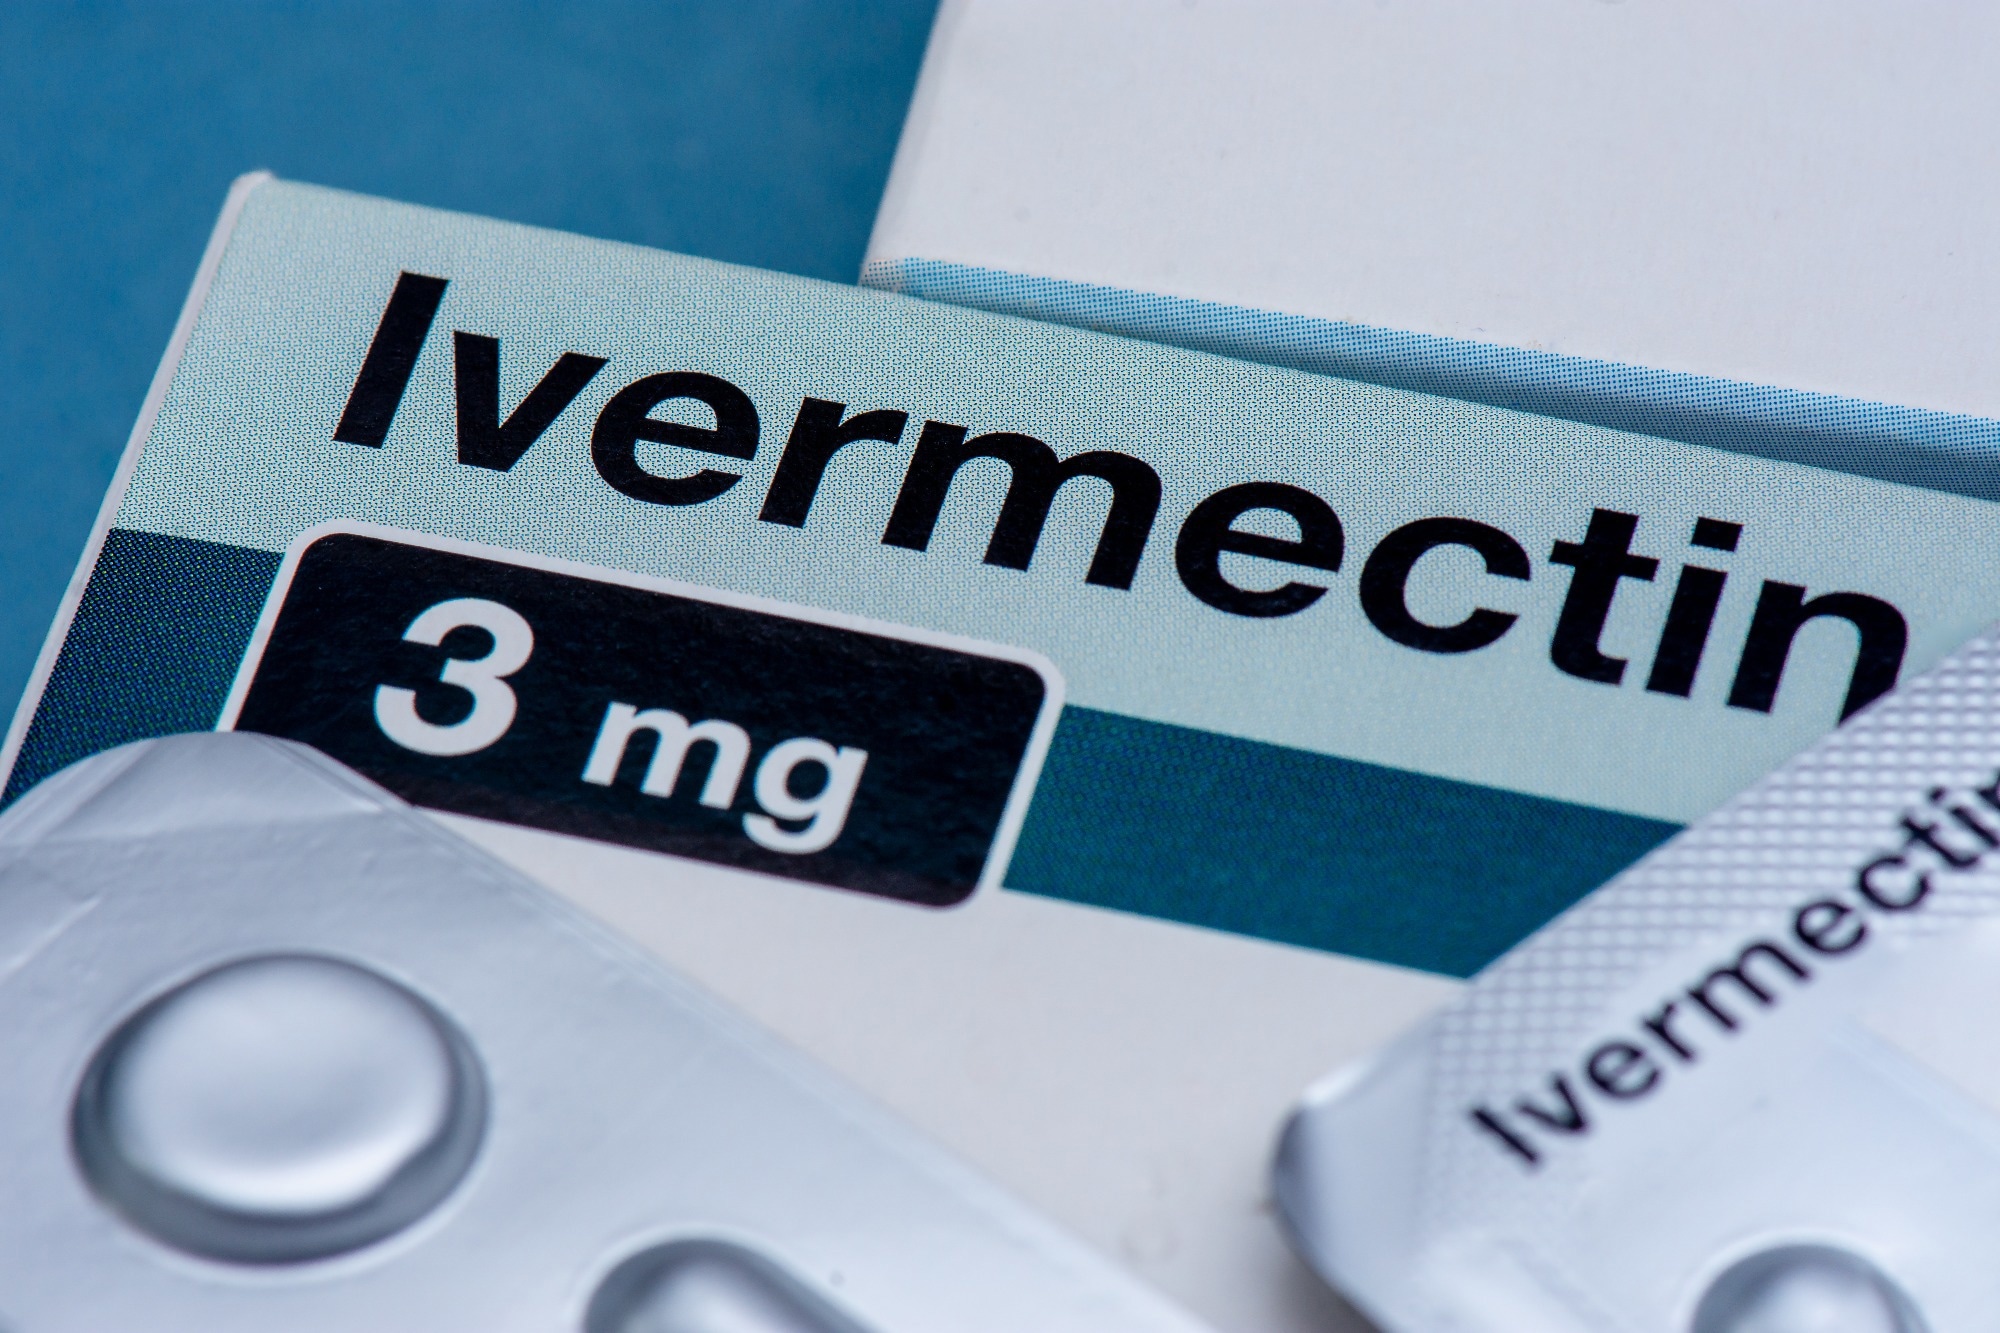 Study: Effect of Ivermectin 600 μg/kg for 6 days vs Placebo on Time to Sustained Recovery in Outpatients with Mild to Moderate COVID-19: A Randomized Clinical Trial. Image Credit: HJBC/Shutterstock